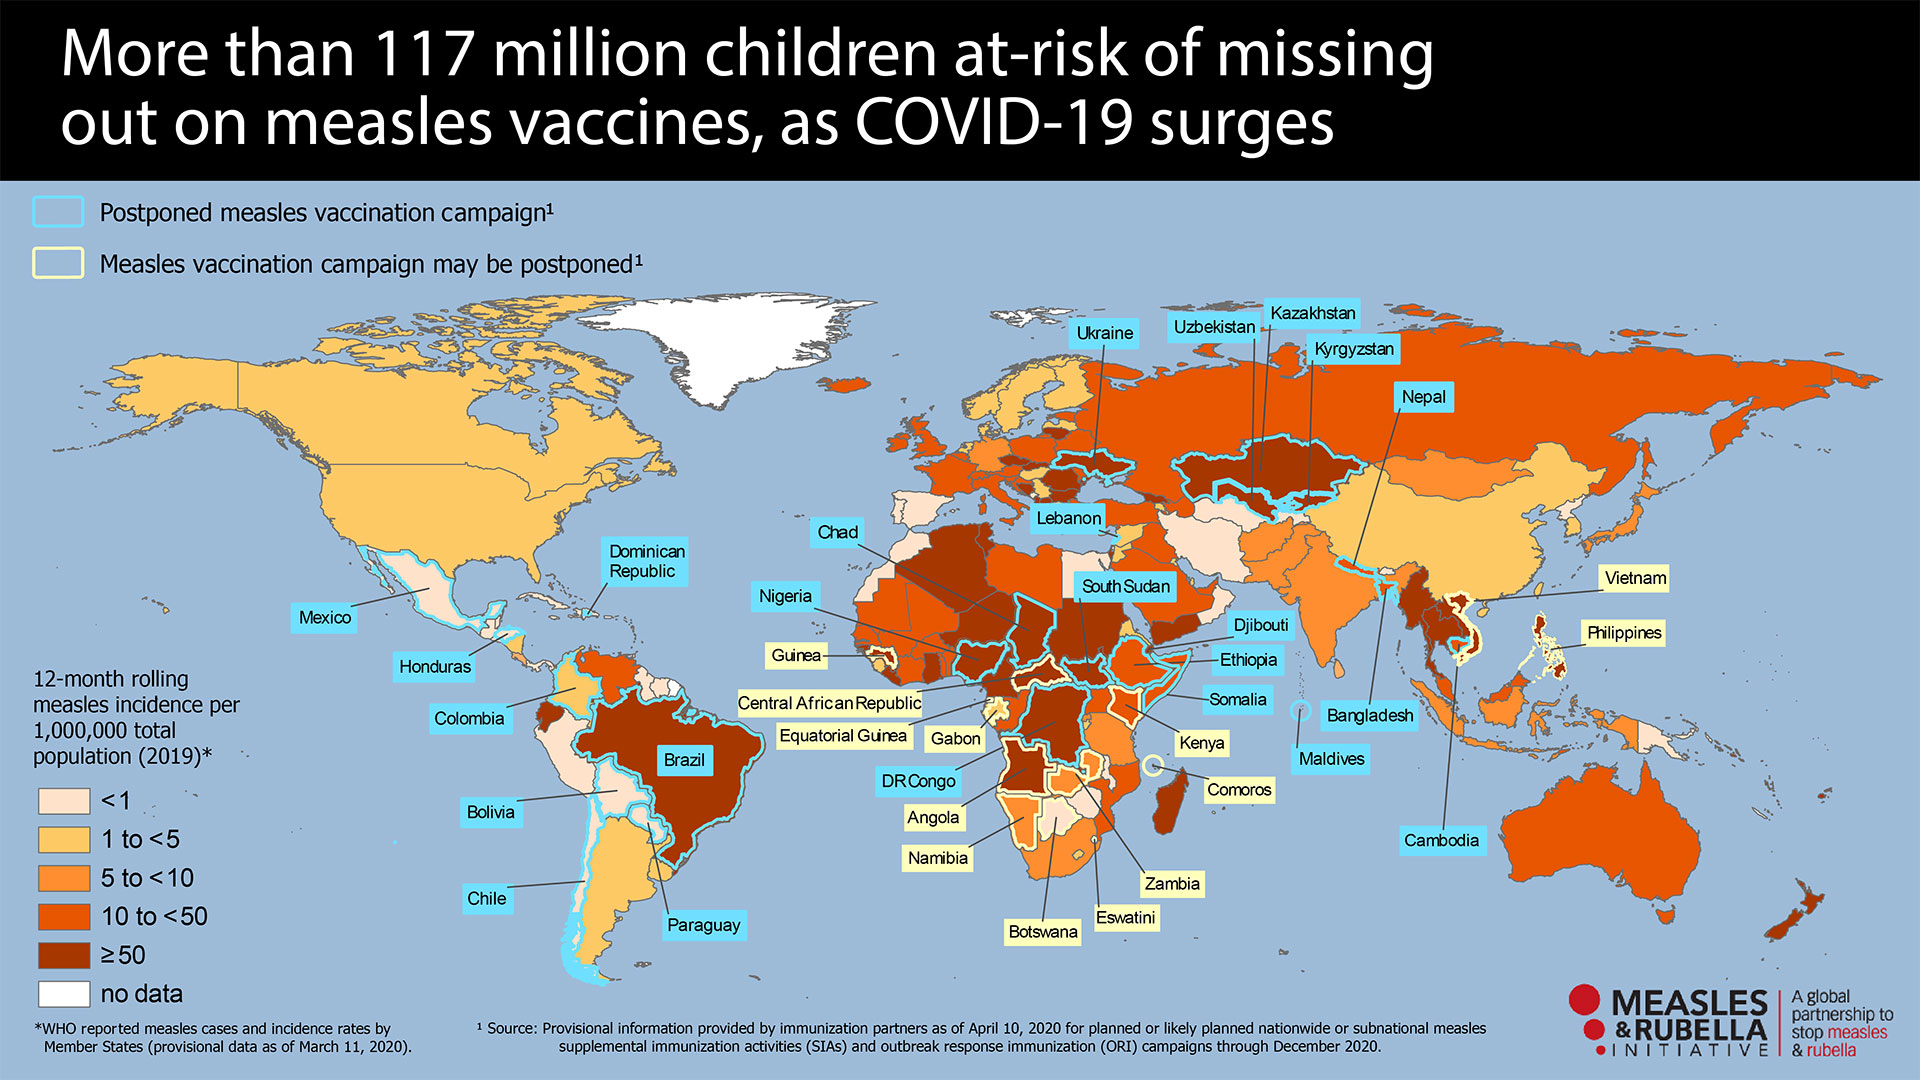 More than 117 million children around the world are at risk of missing measles vaccinations due to the COVID-19 pandemic.